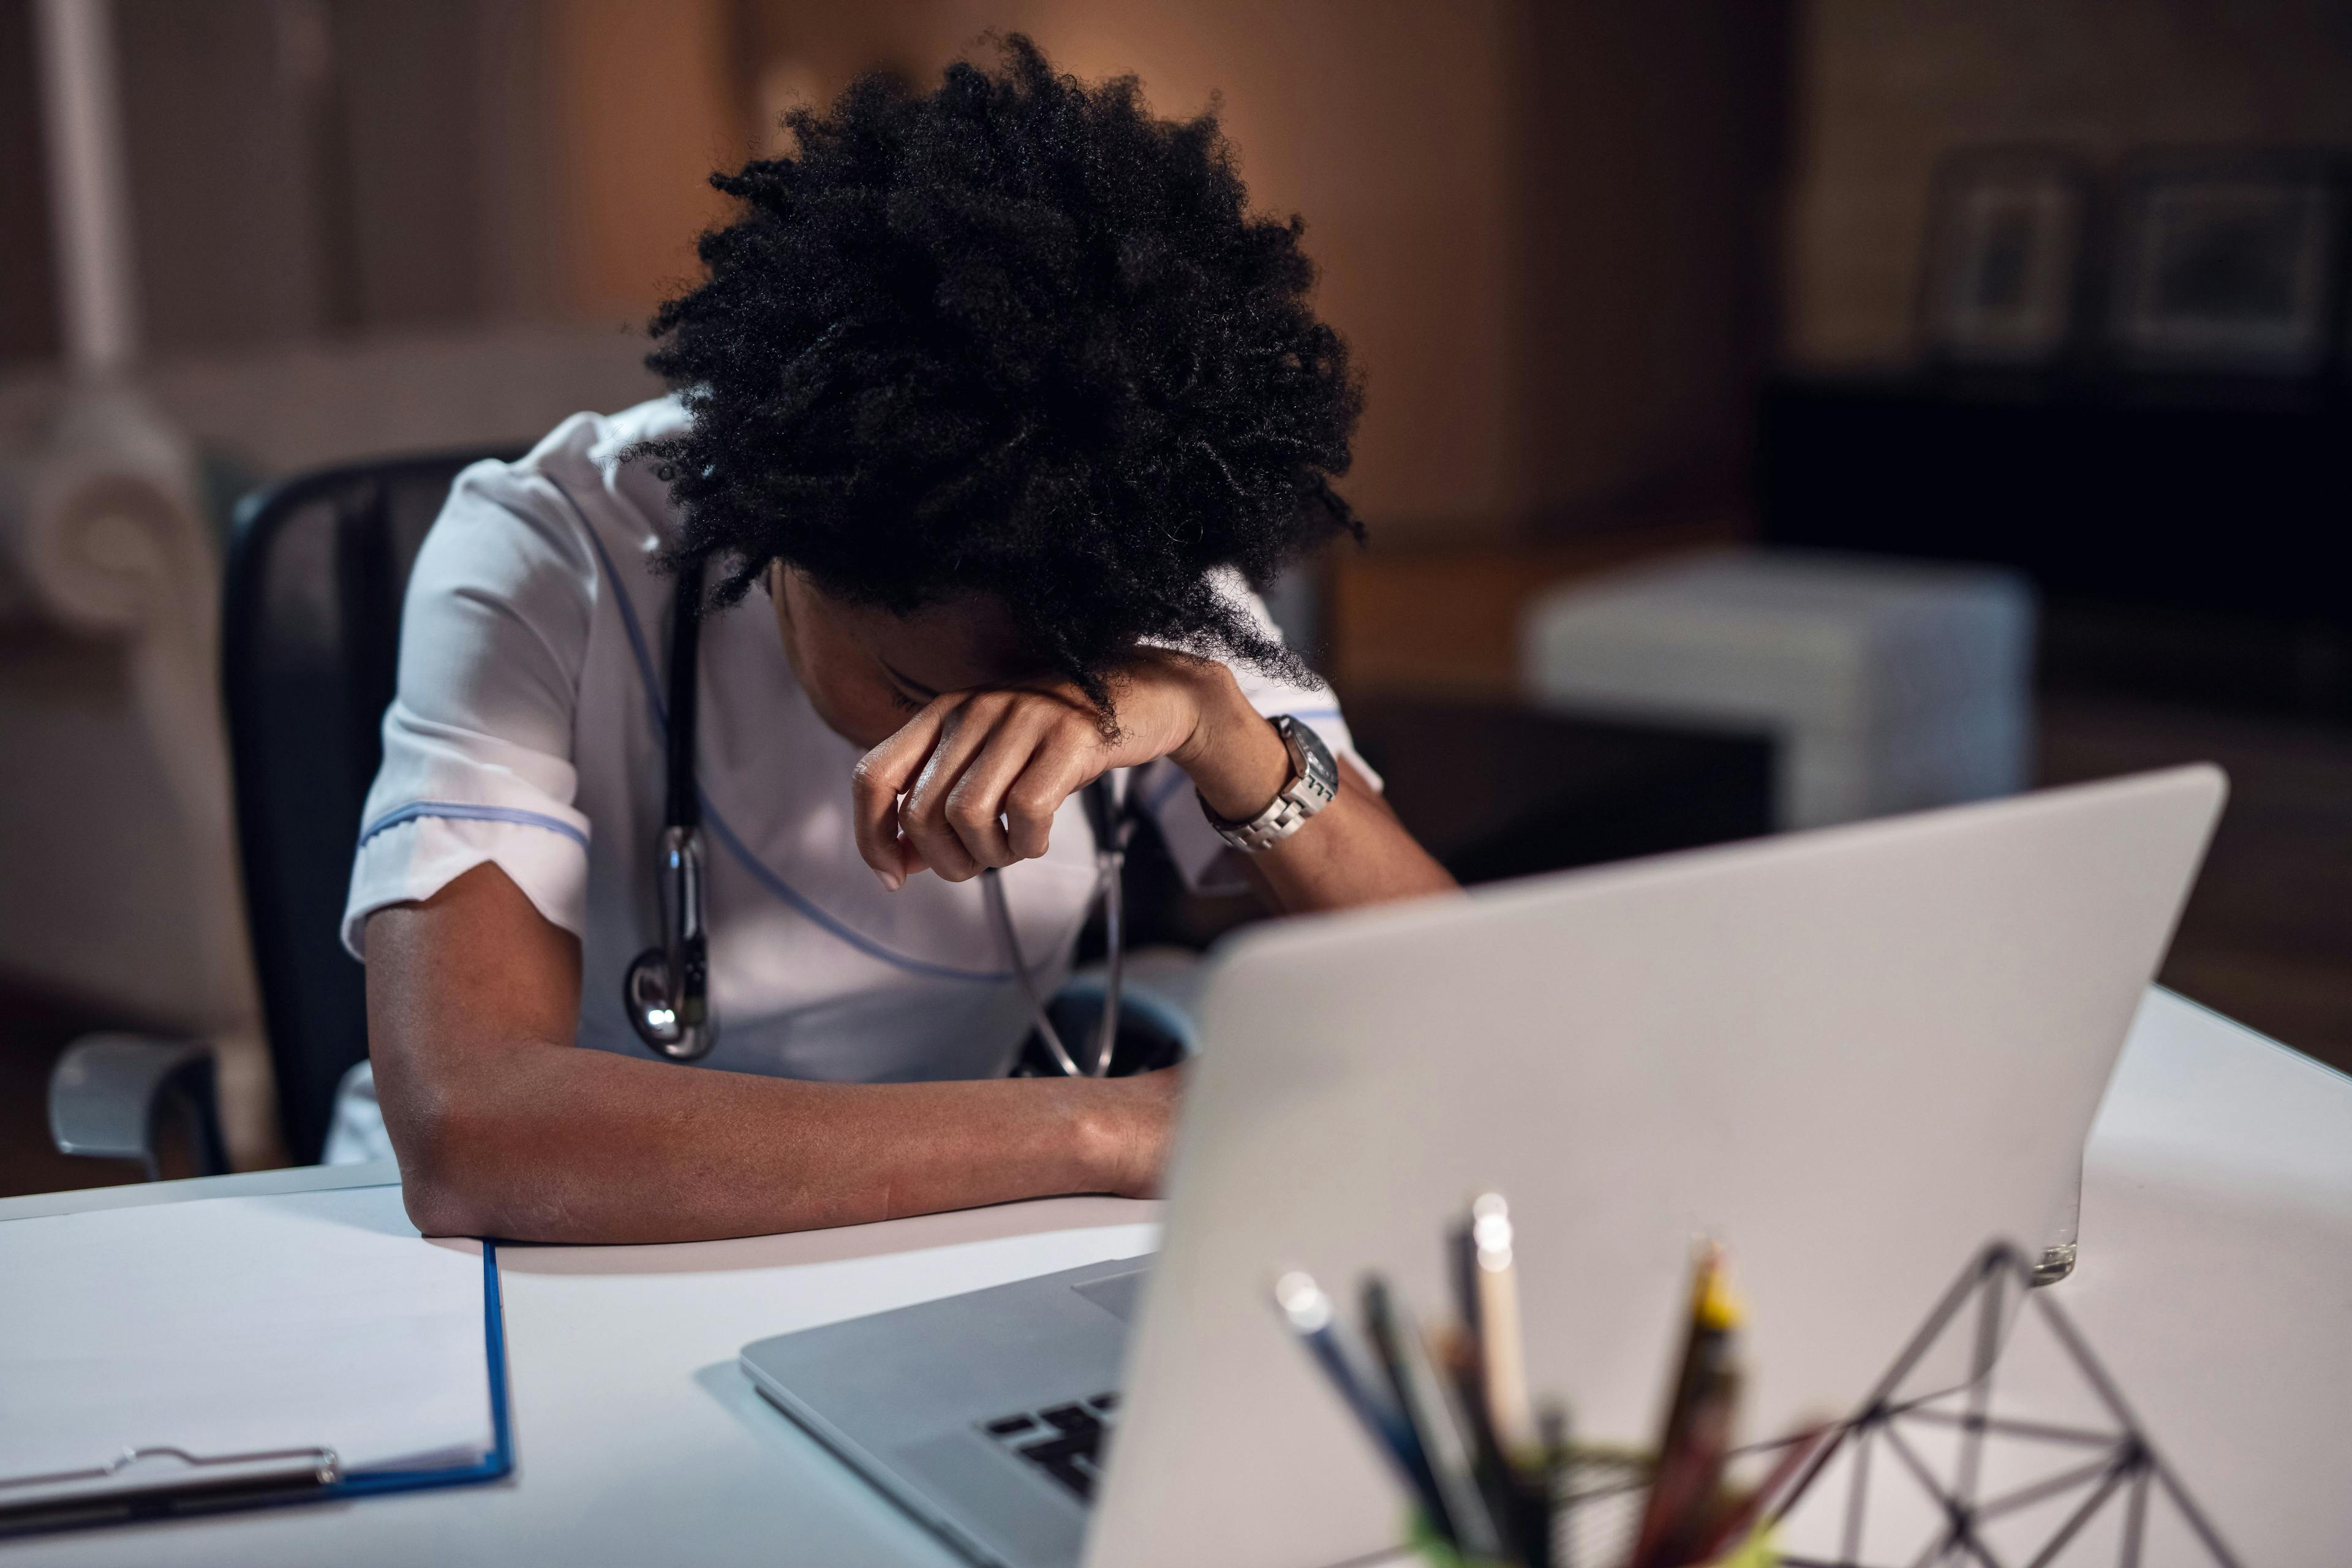 The vast majority of nurses say they've seen or experienced racial discrimination from patients, and more than half have endured racism and bias from colleagues, a recent survey finds. (Image credit: ©Drazen - stock.adobe.com)